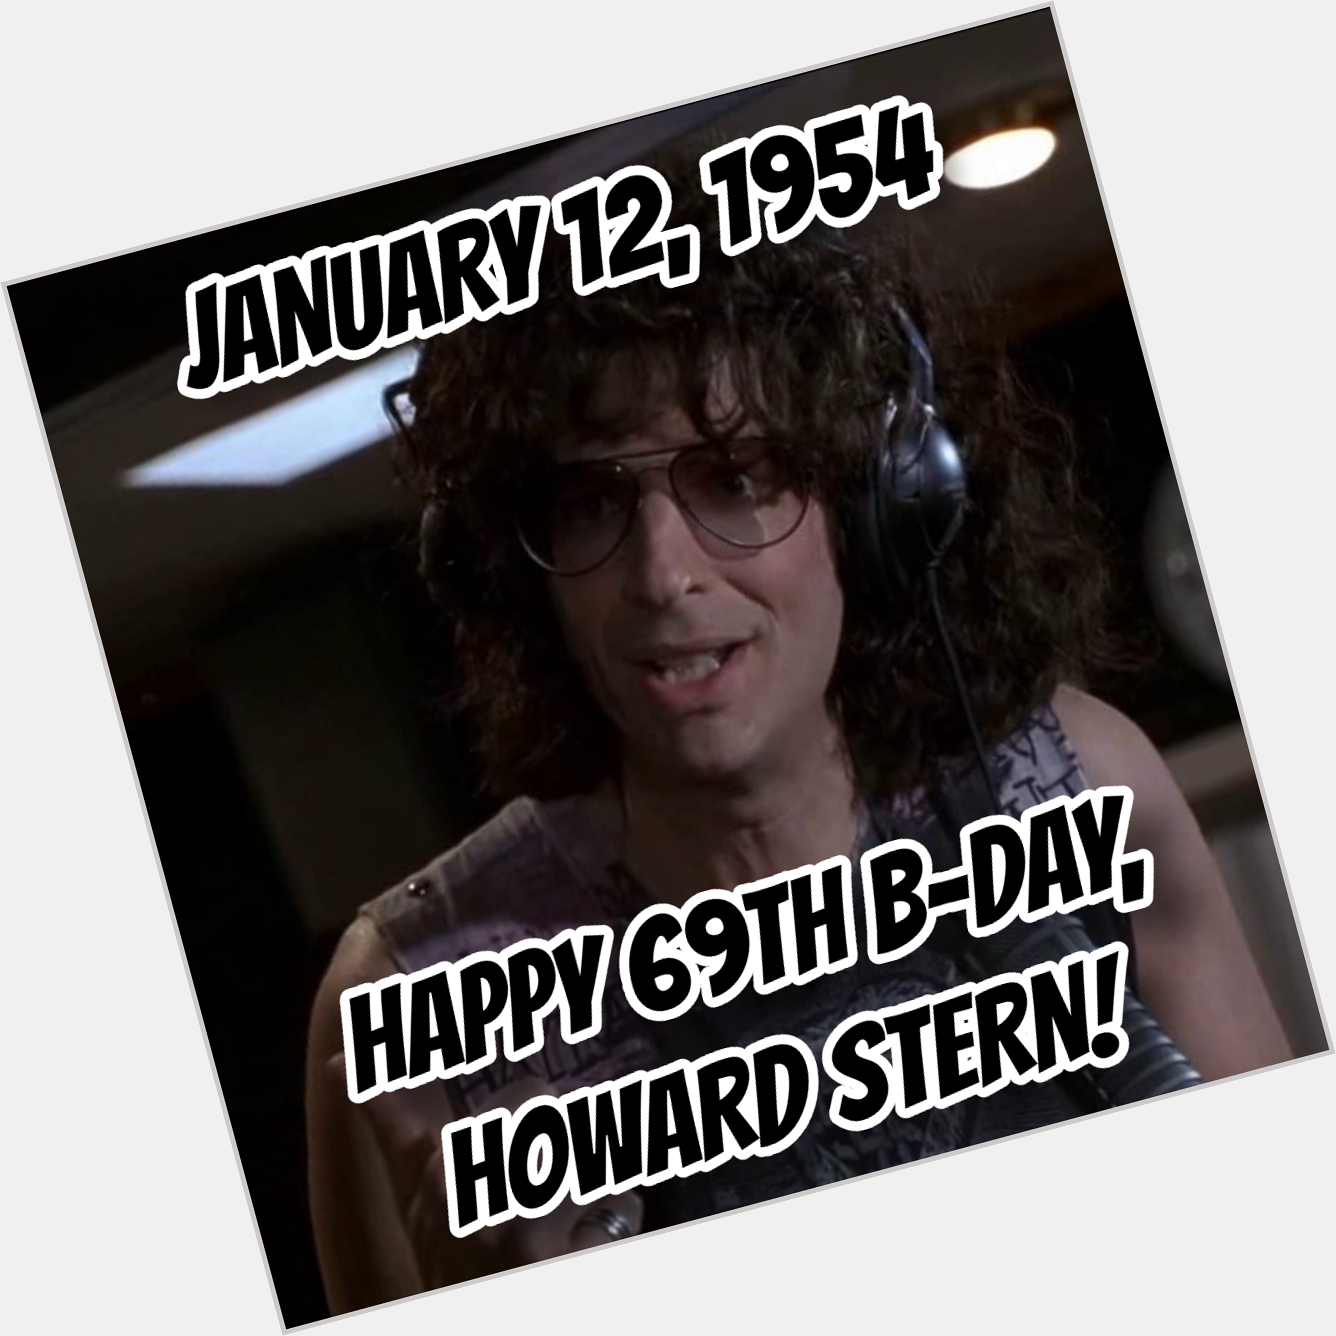 Happy 69th Howard Stern!!!

What\s YOUR  movie or T.V. Show??!! 